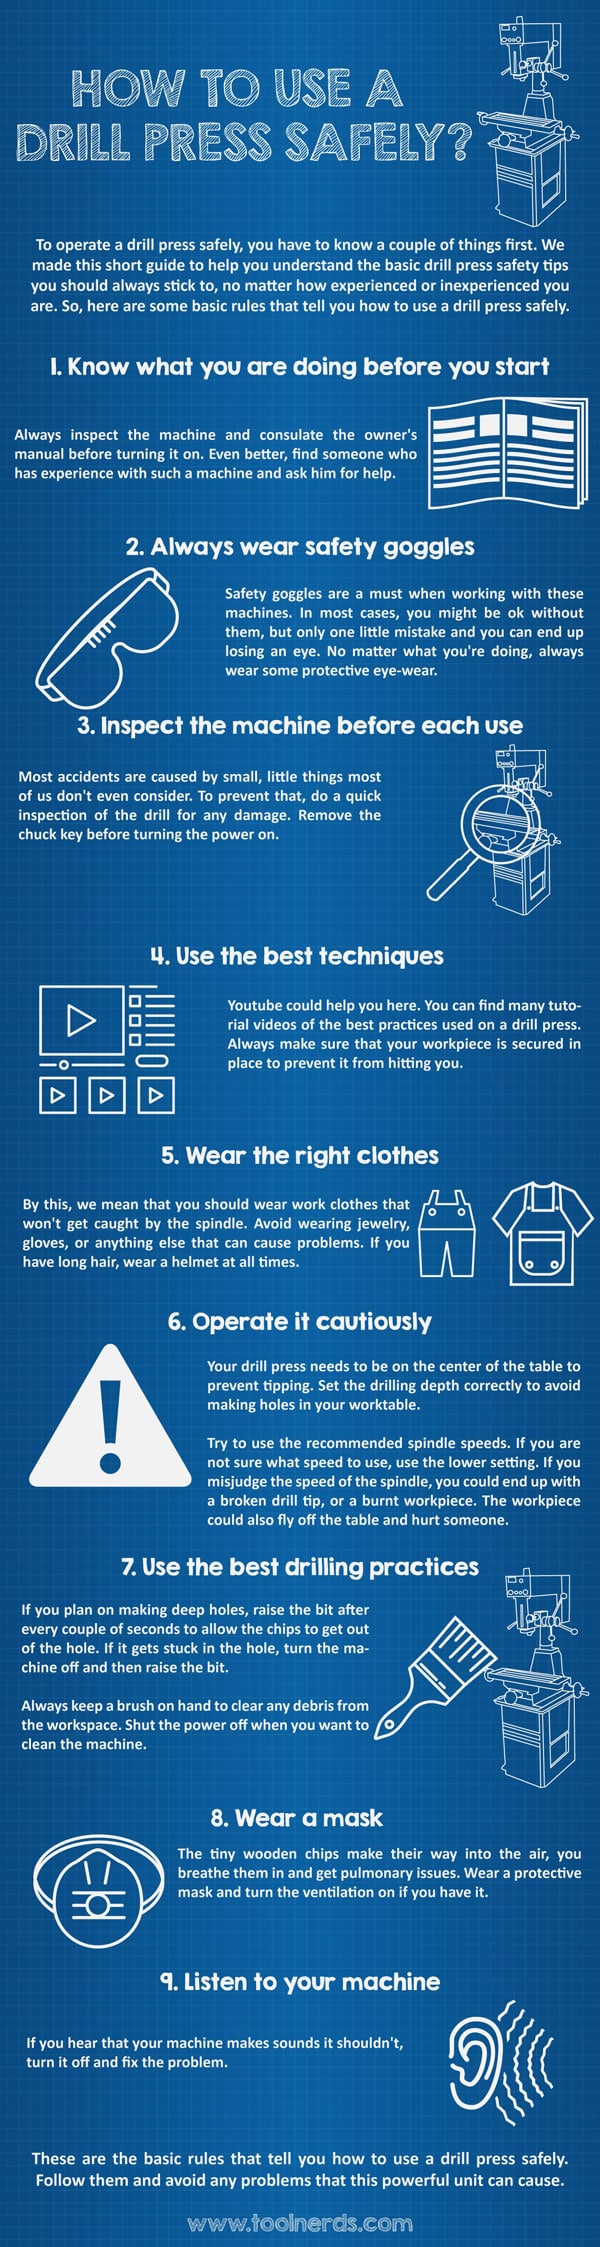 How to Use a Drill Press Safely Infographic